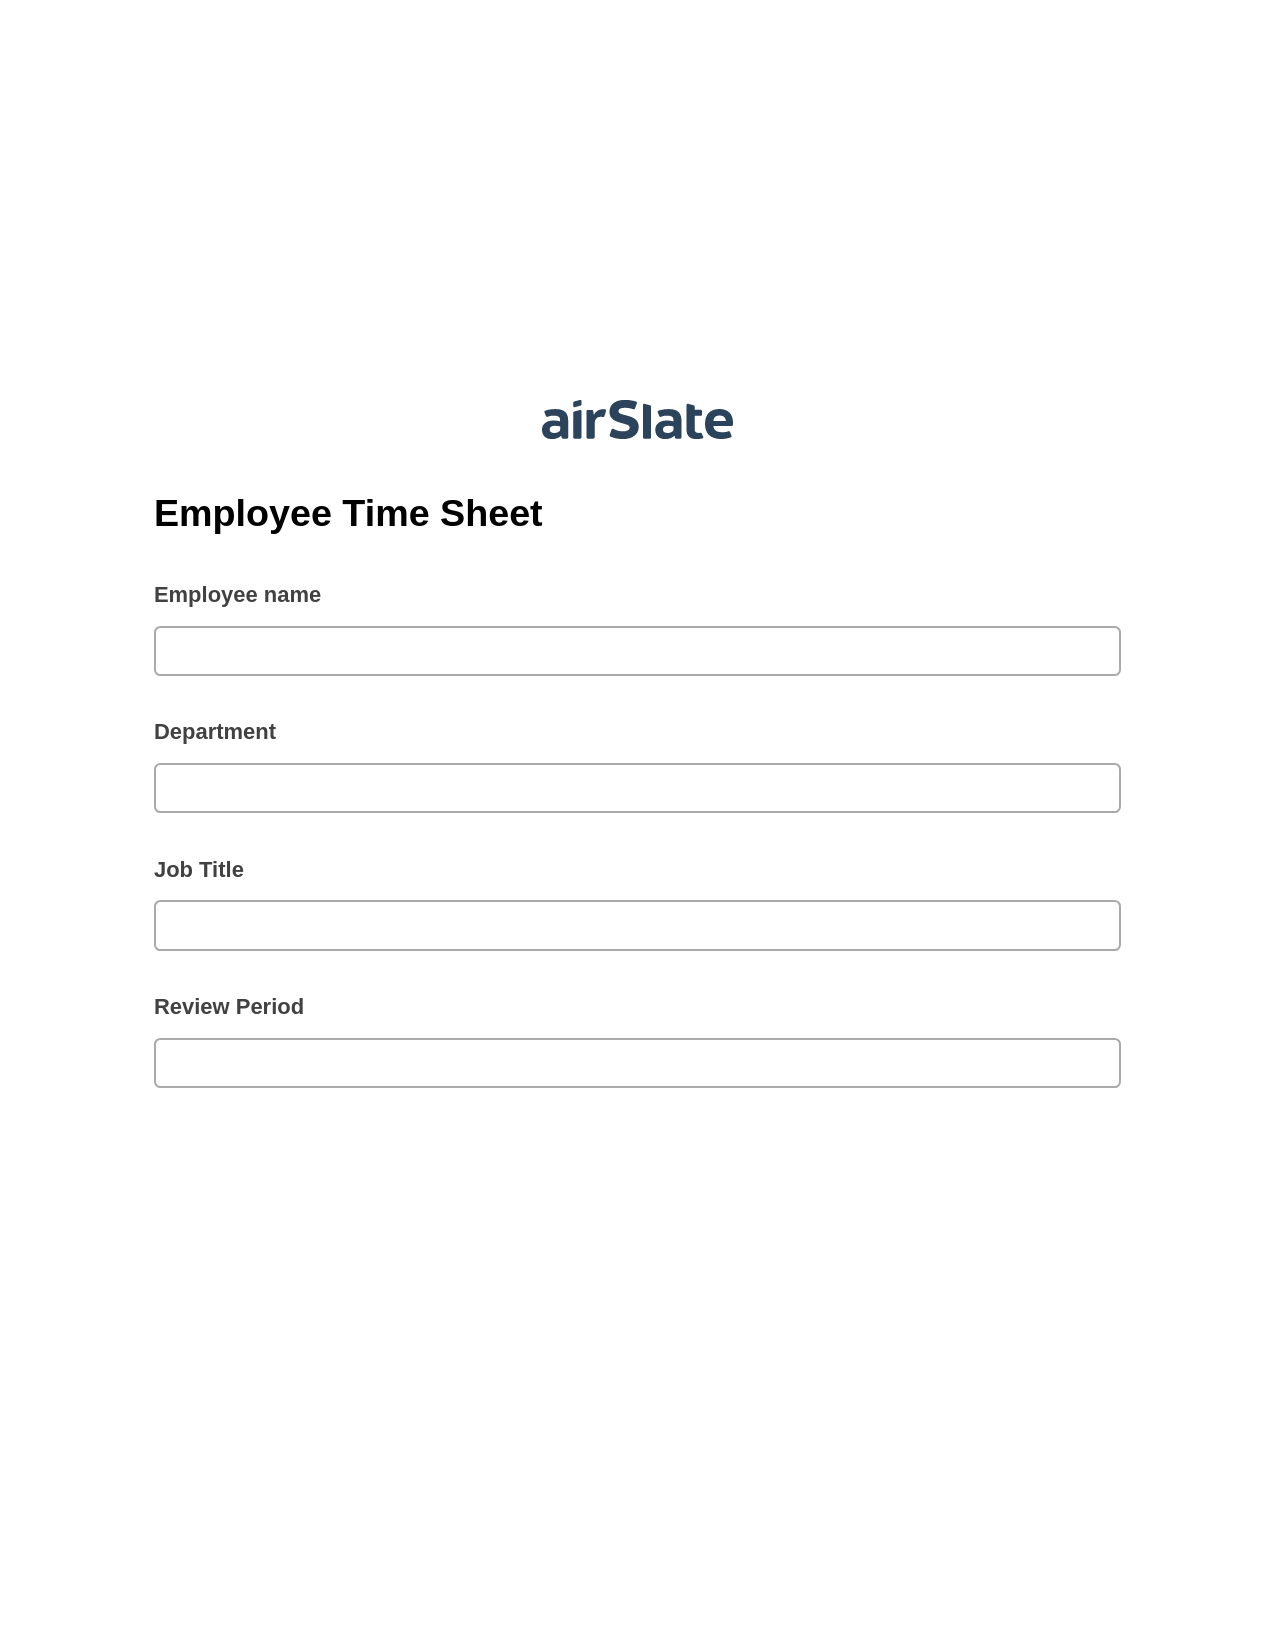 Multirole Employee Time Sheet Pre-fill from Excel Spreadsheet Bot, Create Salesforce Records Bot, Export to Excel 365 Bot